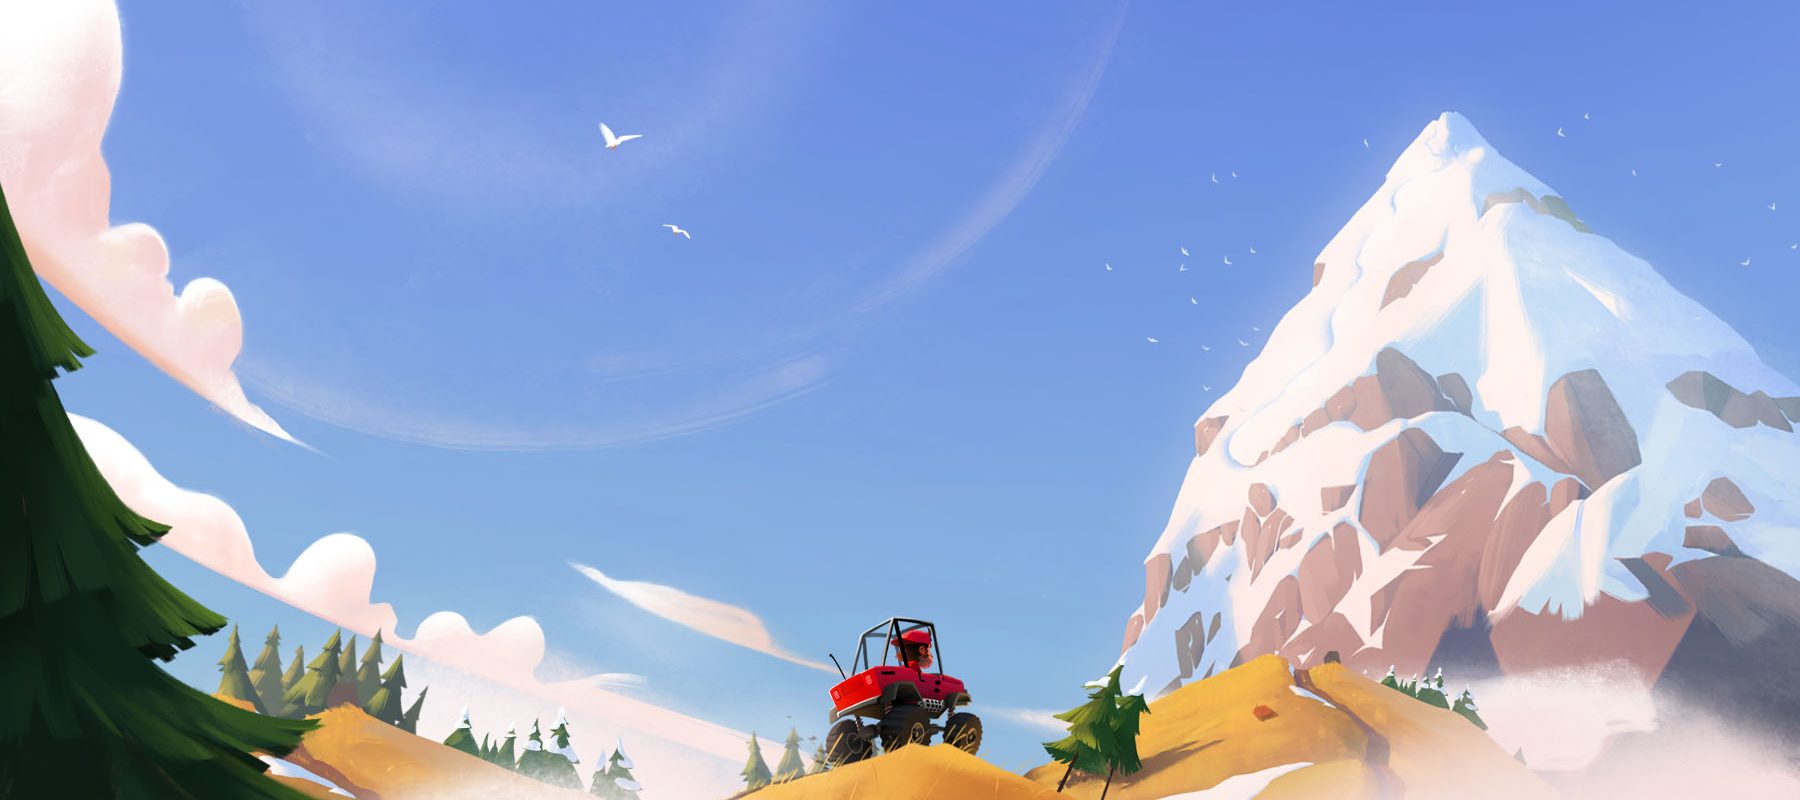 Get the Hill Climb Racing 2 mobile game • Fingersoft